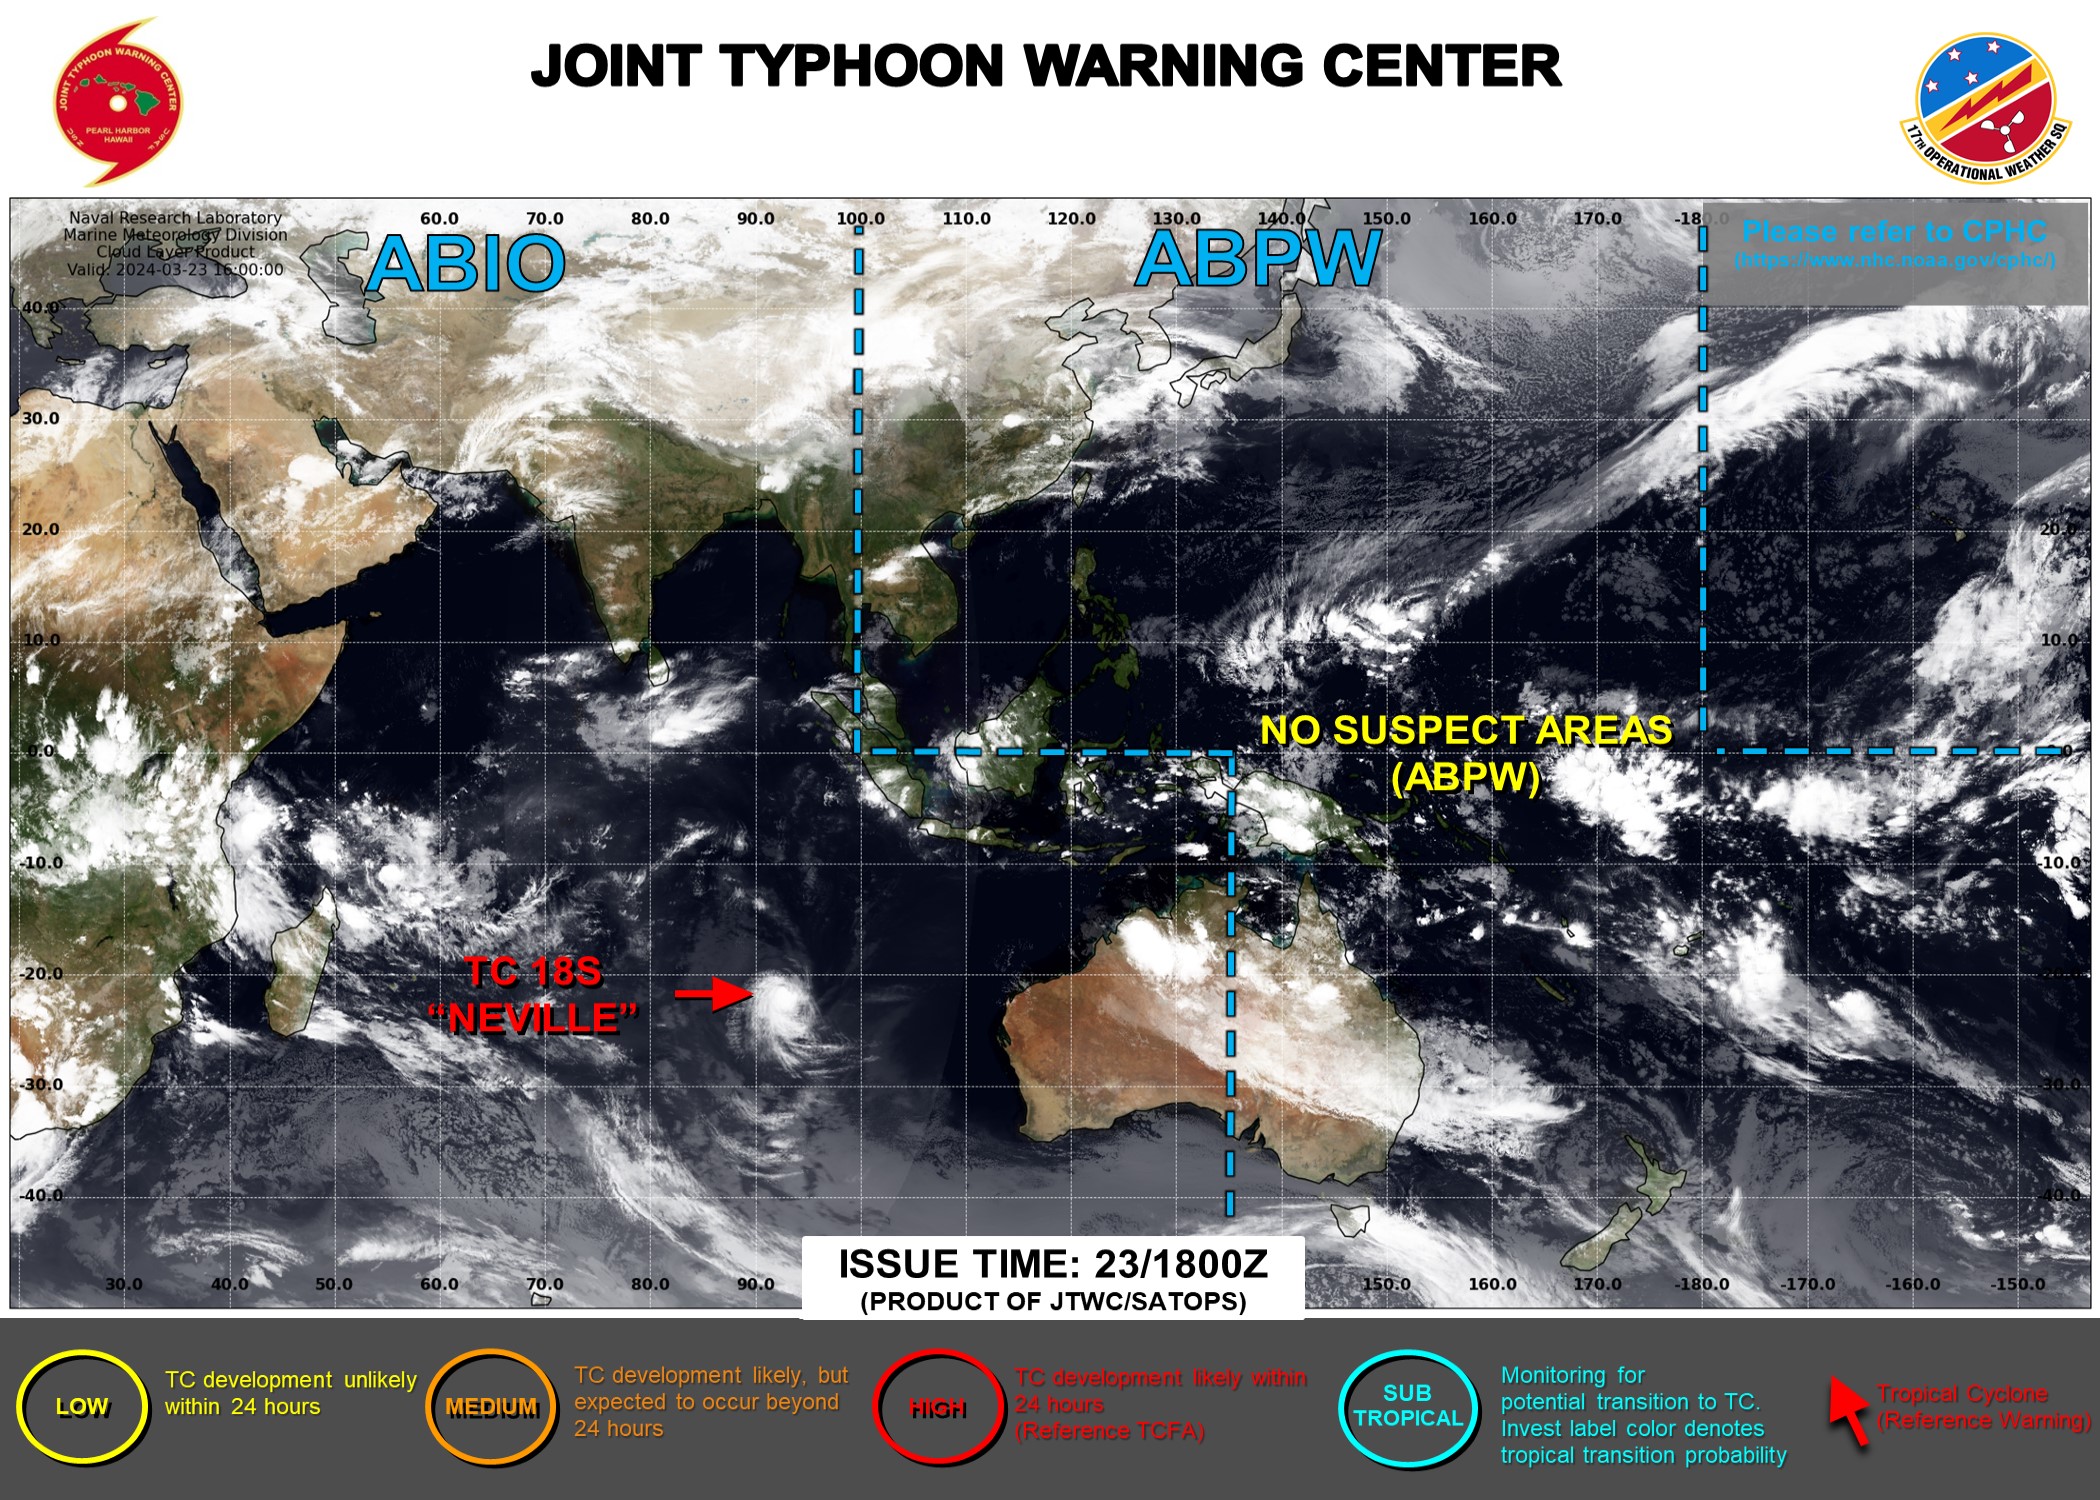 JTWC IS ISSUING 12HOURLY WARNINGS AND 3HOURLY SATELLITE BULLETINS ON TC 18S